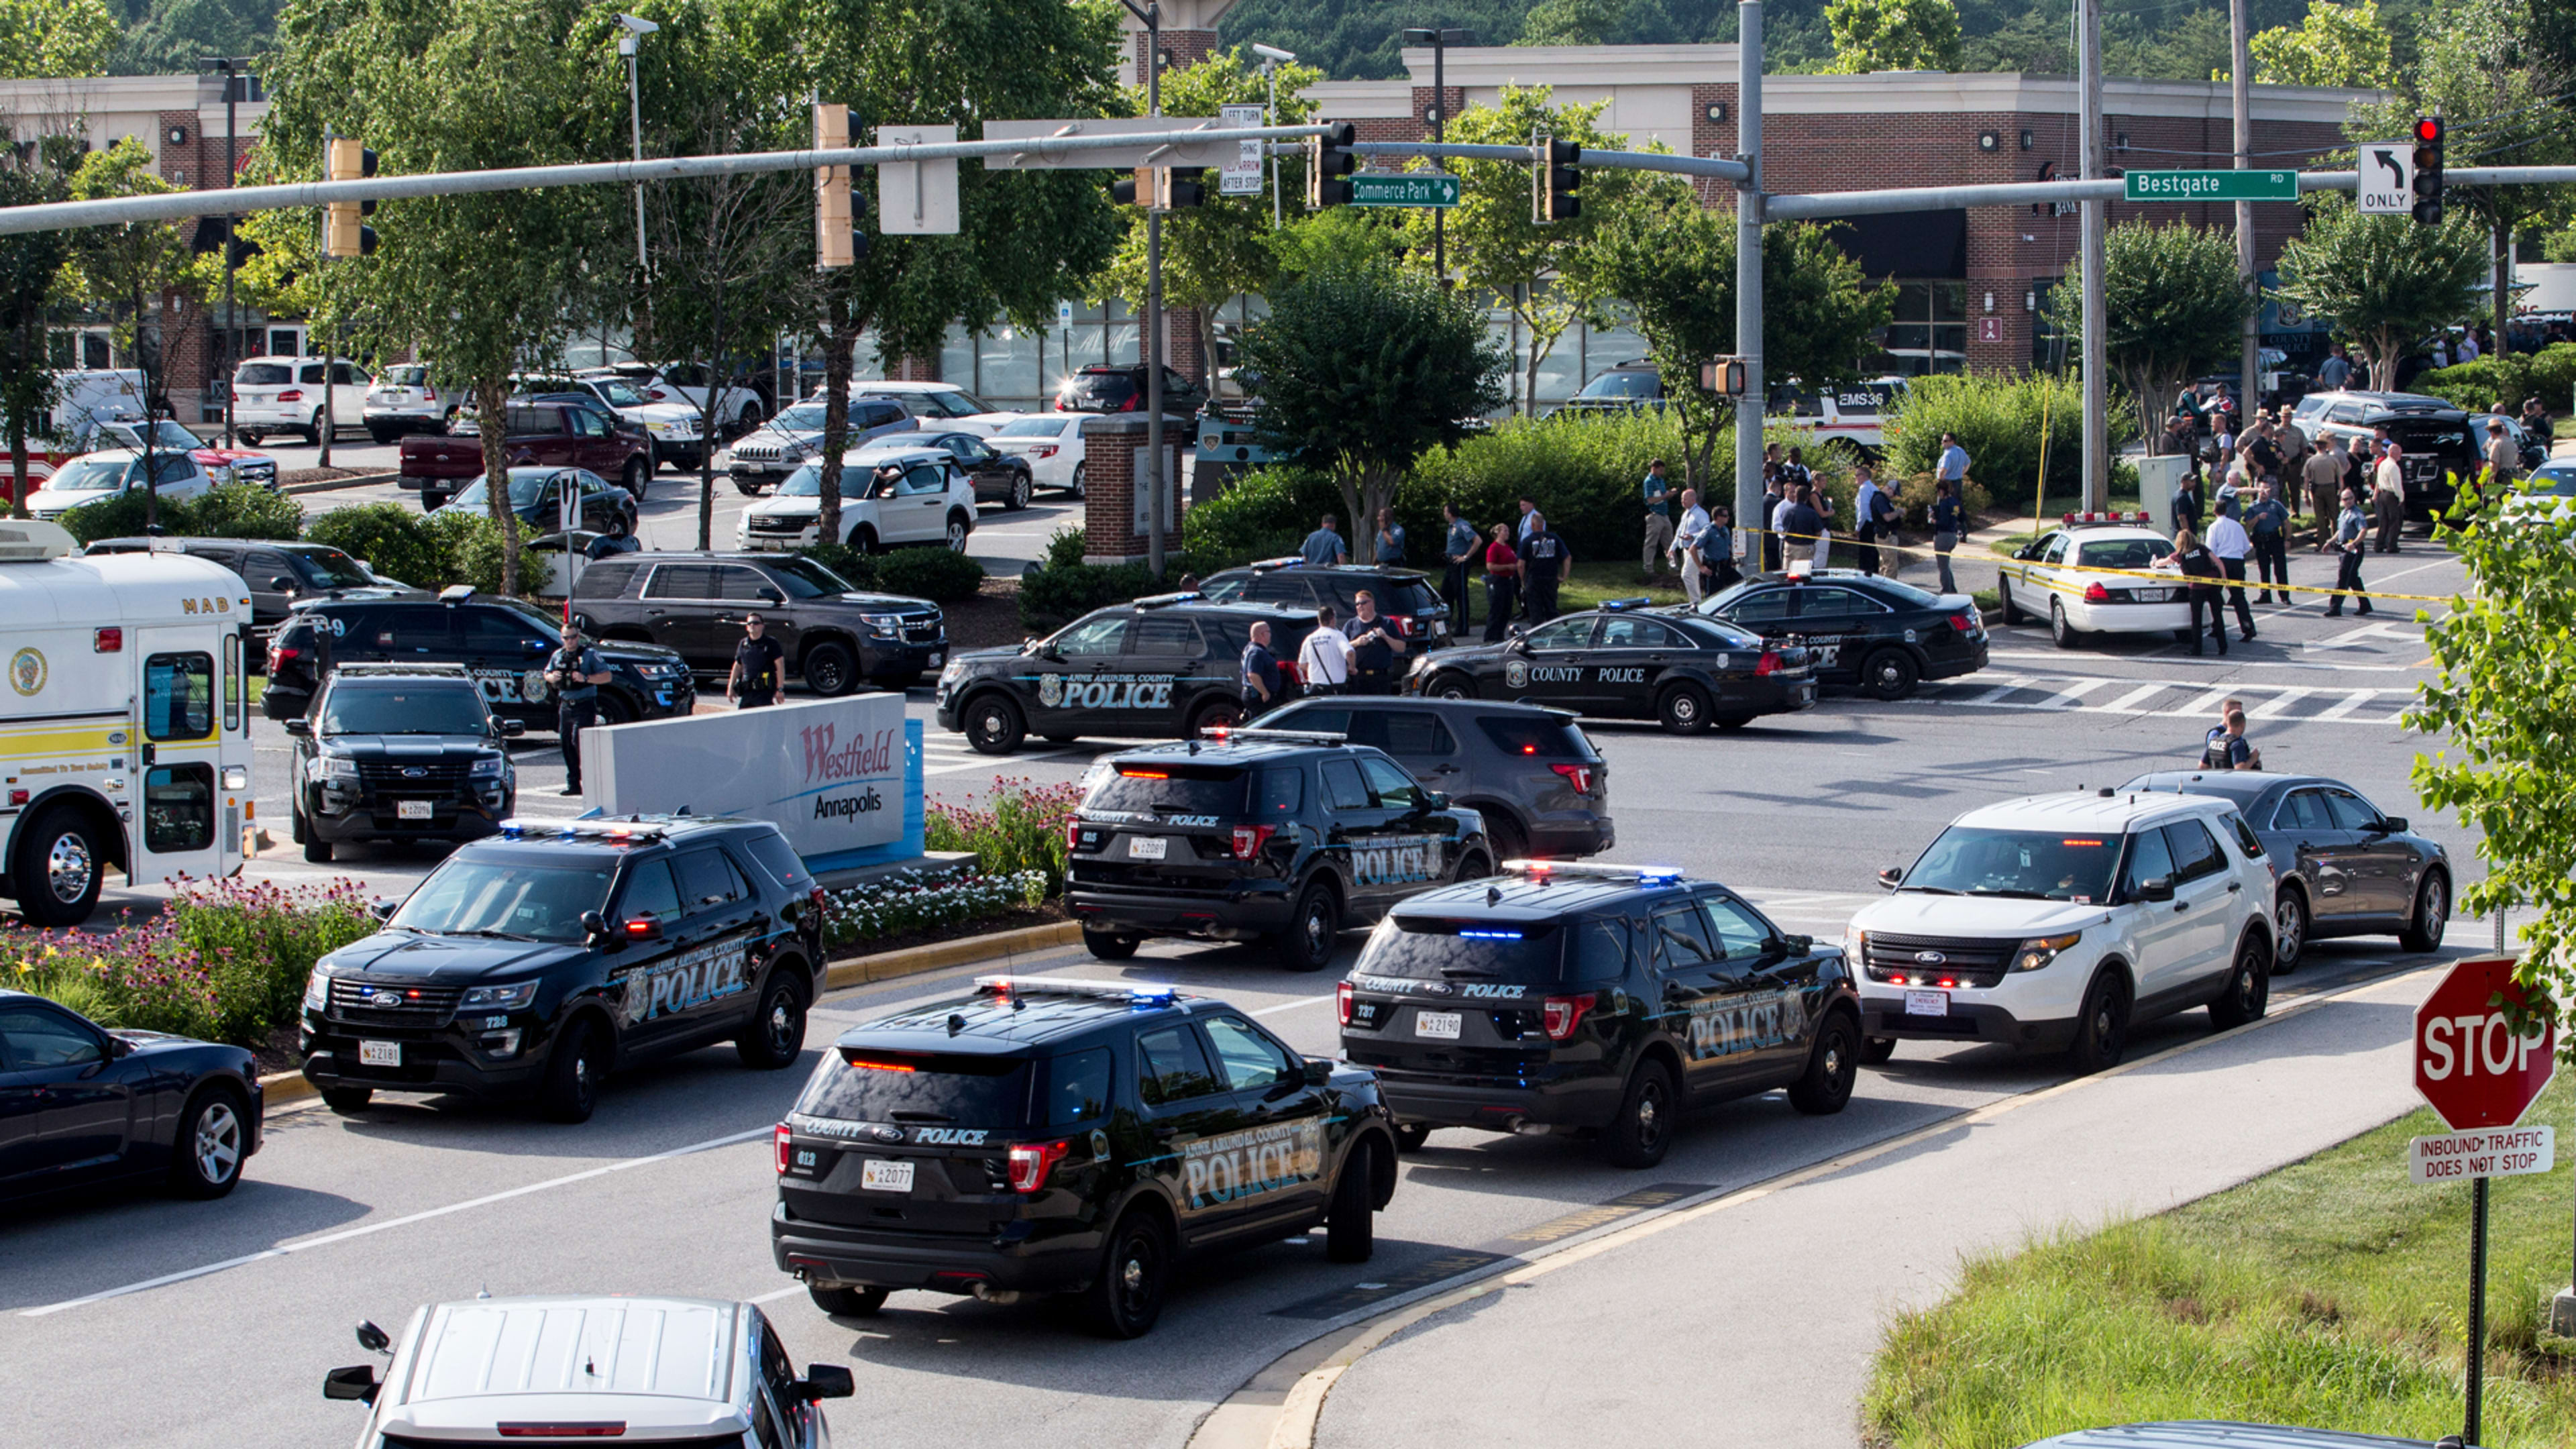 Capital Gazette shooting: How to help newsroom victims in Annapolis right now